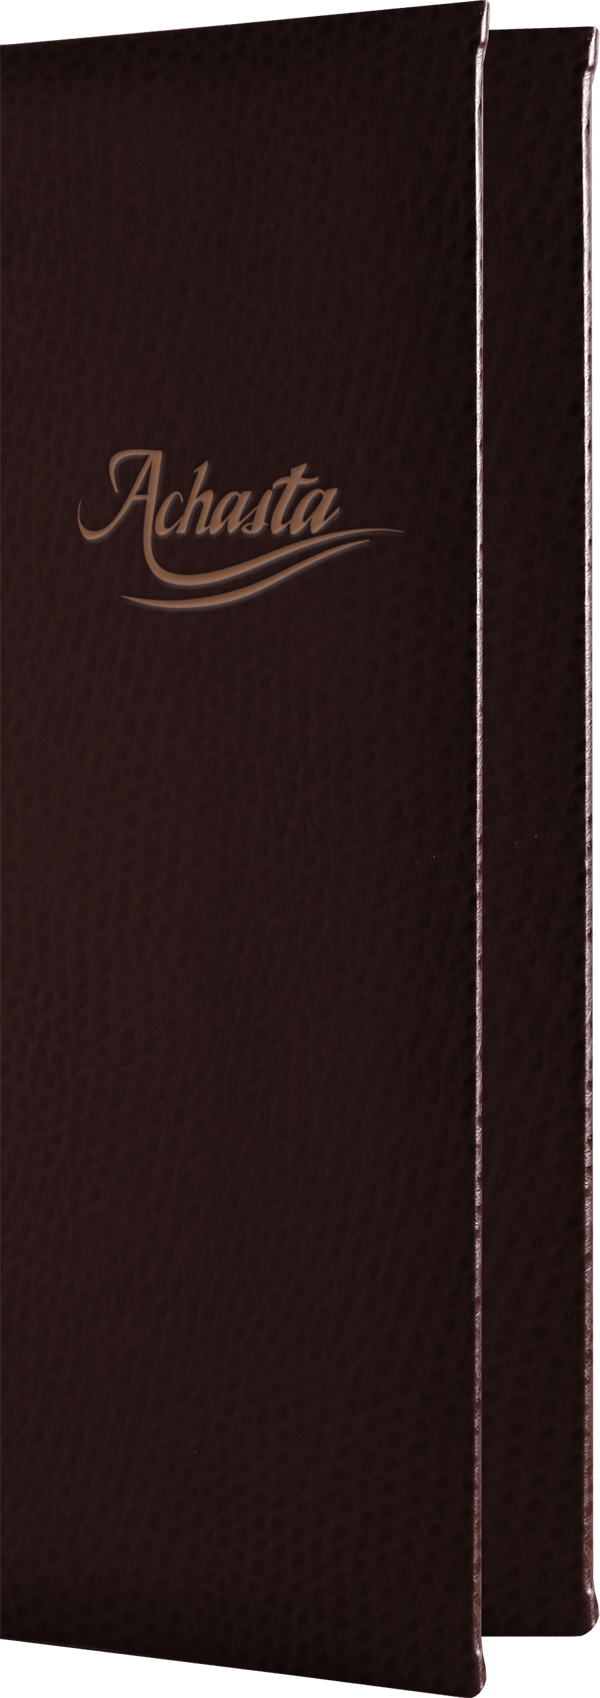 Gold and country club clubhouse restaurant menu covers.  Chesterfield from Menucoverman.com is your best choice.